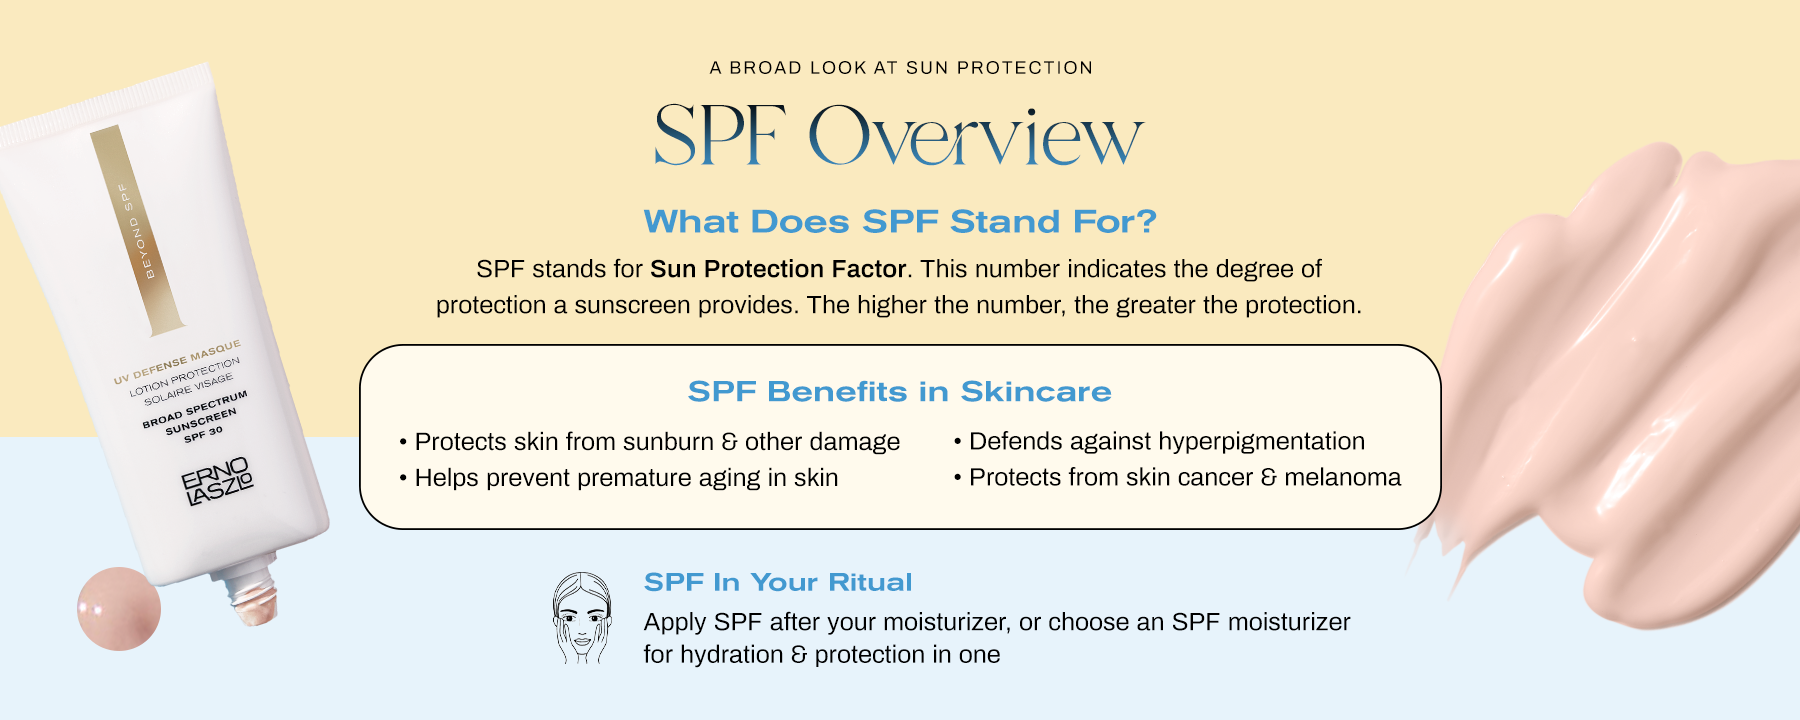 Image of A broad look at sun protection. SPF overview. What does SPF stand for? SPF stands for sun protection factor. This number indicates the degree of sun protection a sunscreen provides. The higher the number, the greater the protection. SPF Benefits in Skincare. Protects skin from sunburn & other damage. Prevents premature aging in skin. Defends against hyperpigmentation. Protects from skin cancer & melanoma. 